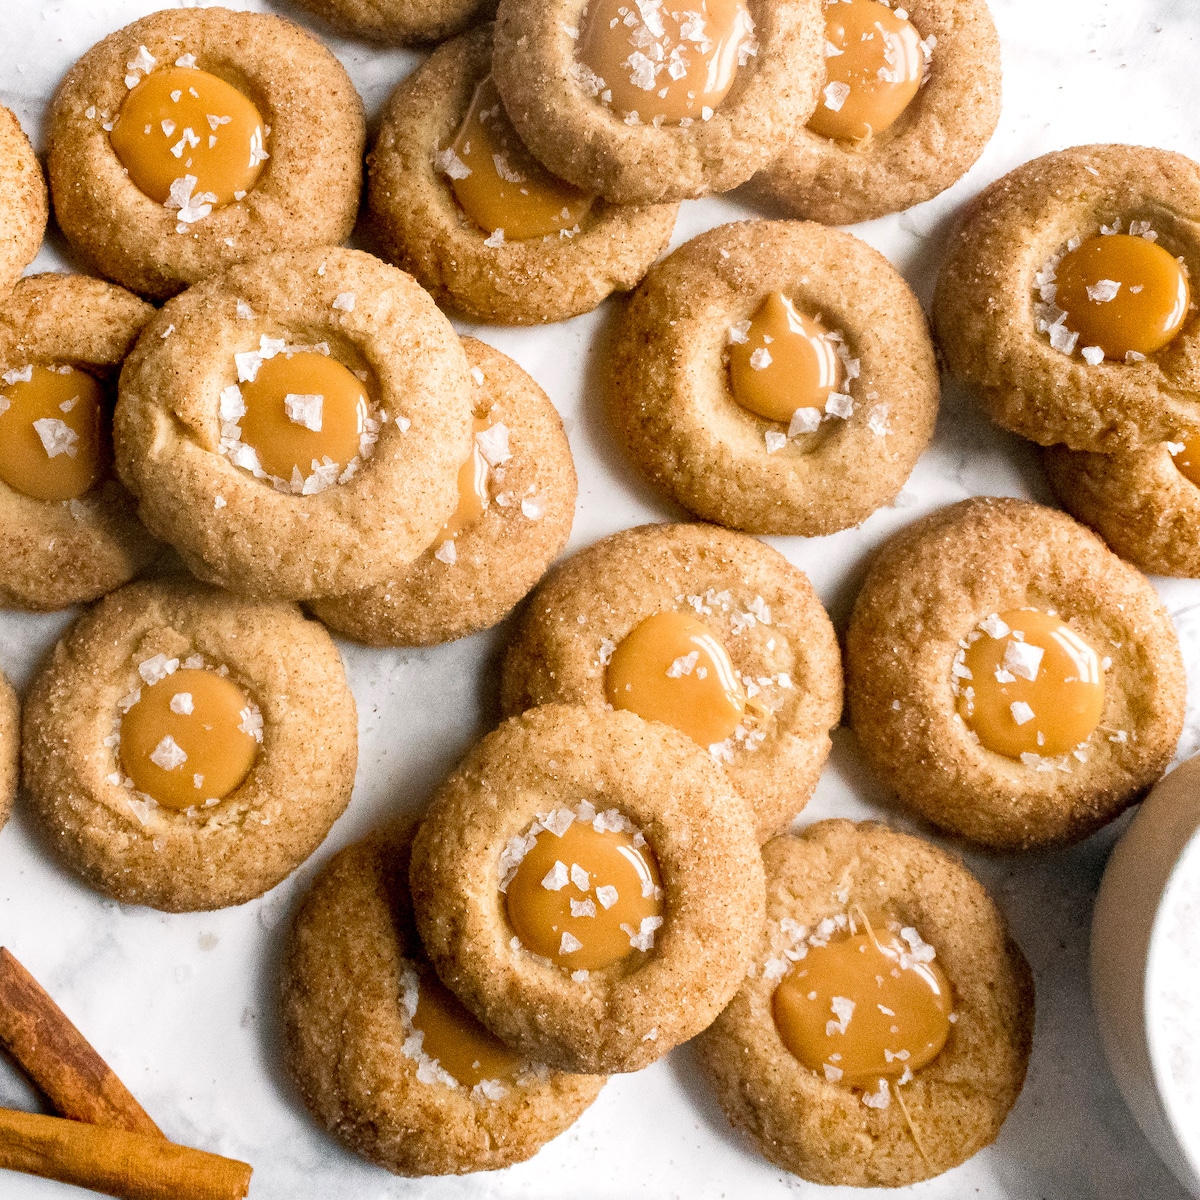 salted caramel thumbprint cookies seen from above